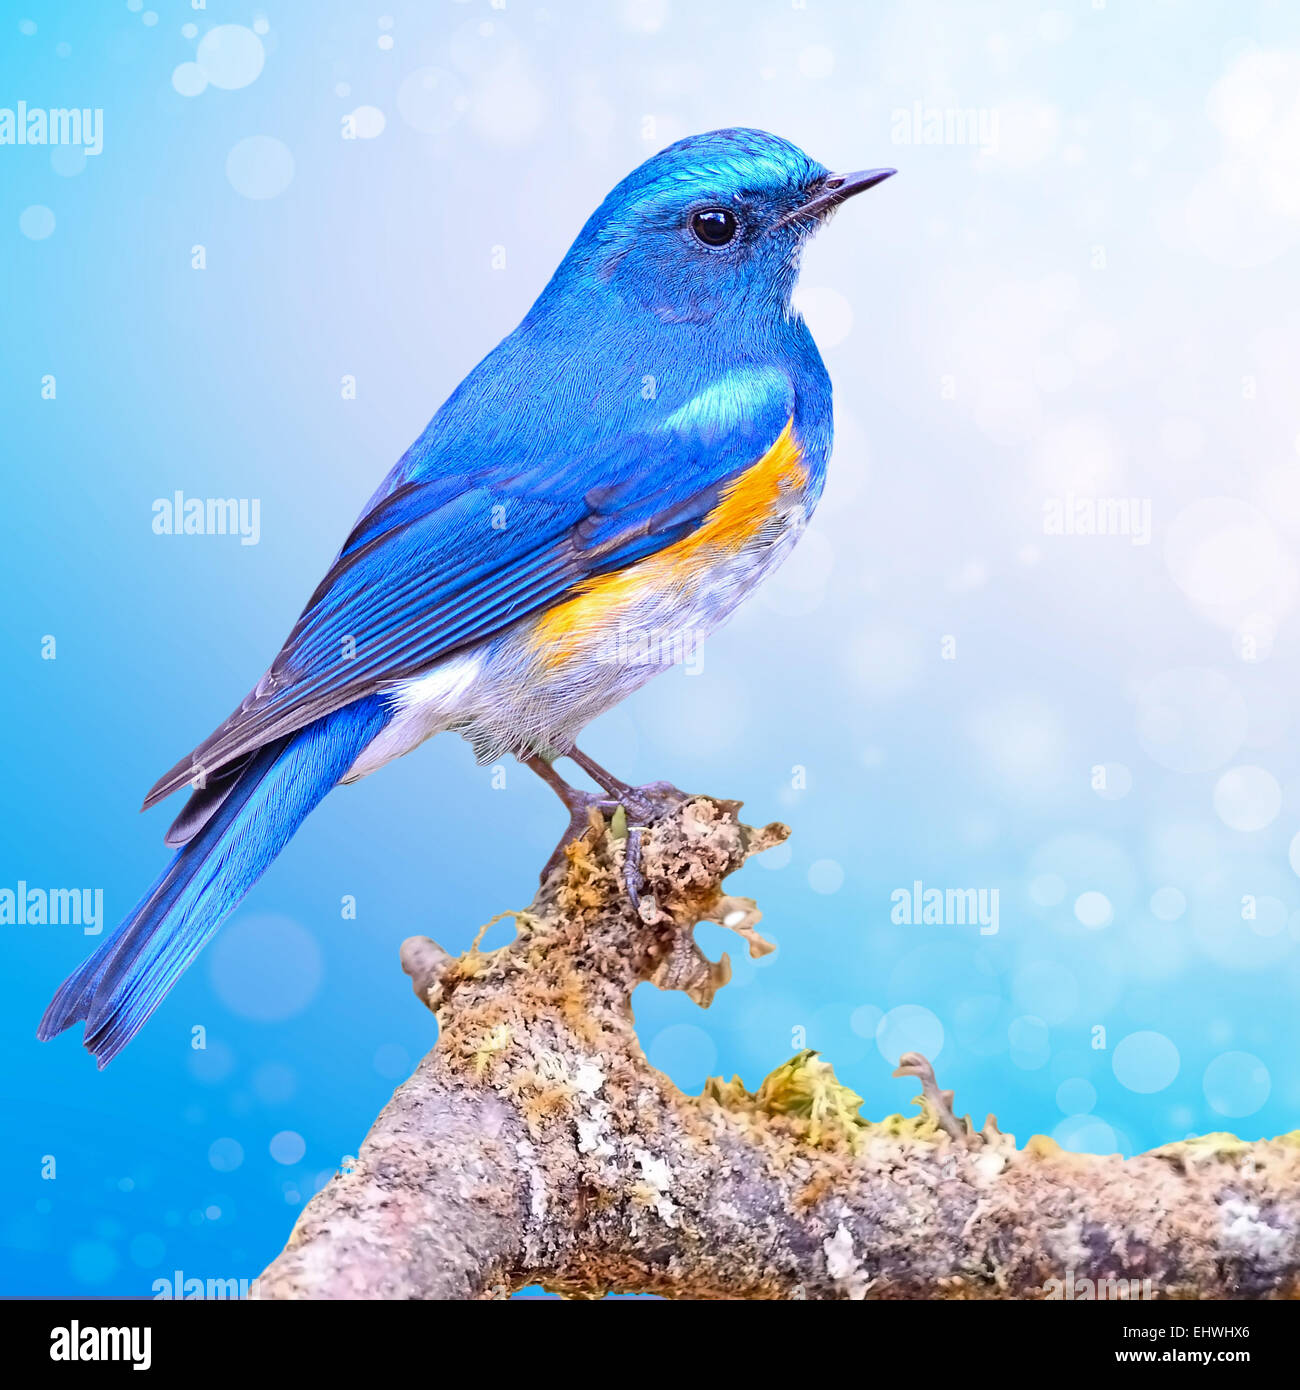 Blue bird, male Himalayan Bluetail (Tarsiger rufilatus), standing on a branch with colorful blue bokeh background Stock Photo